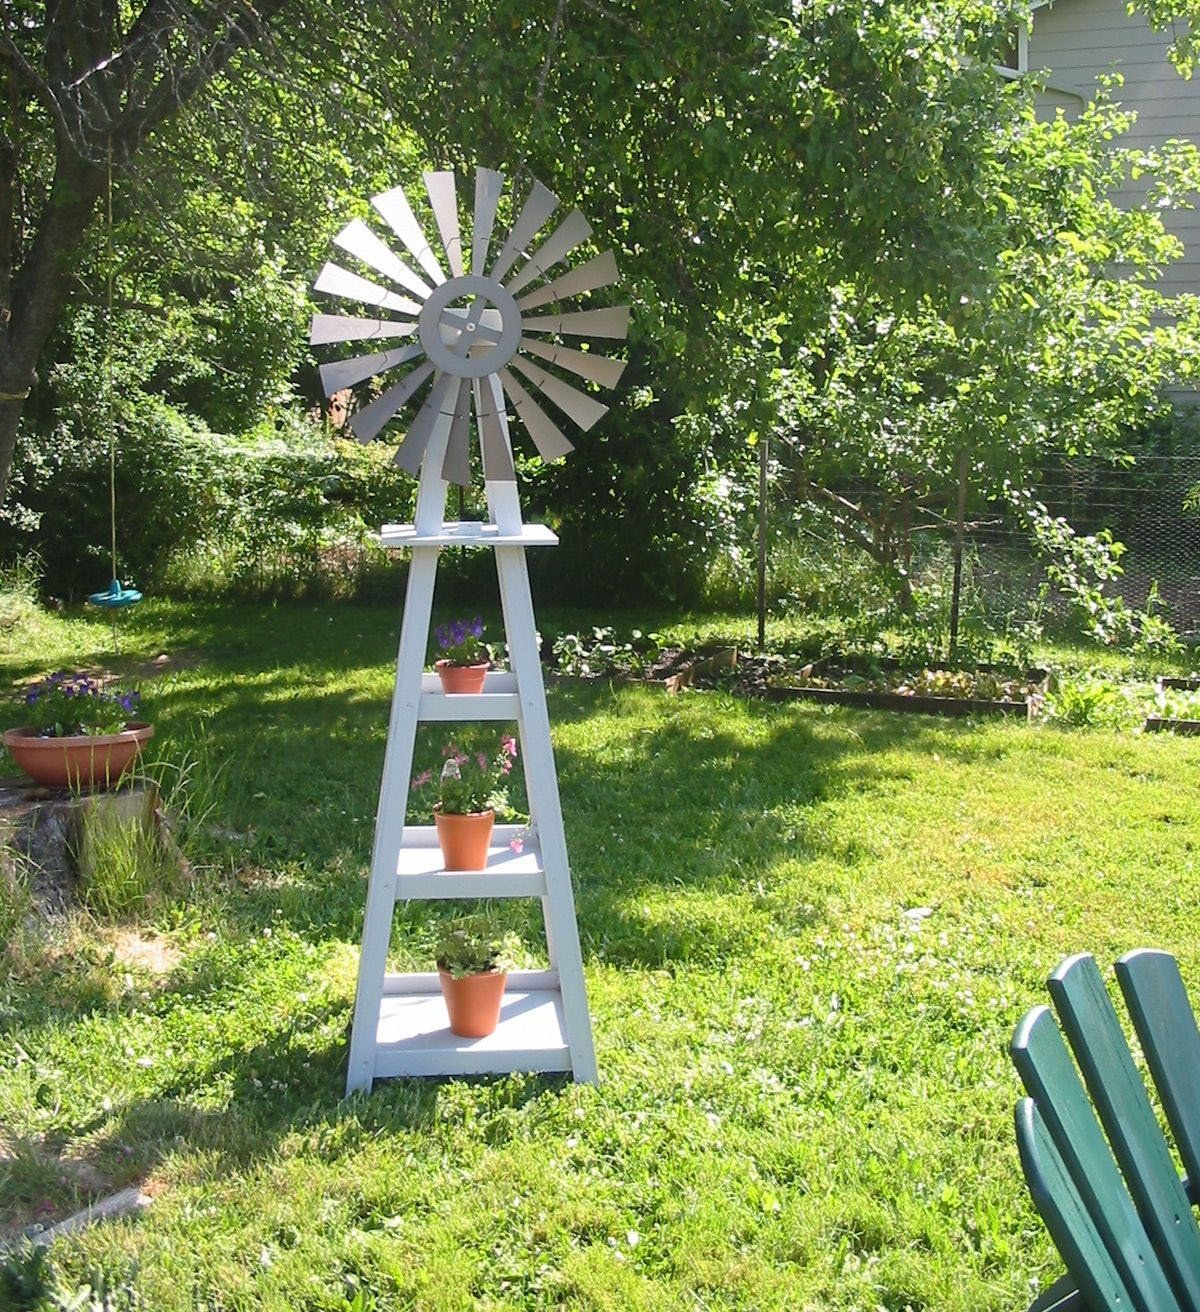 15 Unique and Amazing Lawn Displays - Windmill